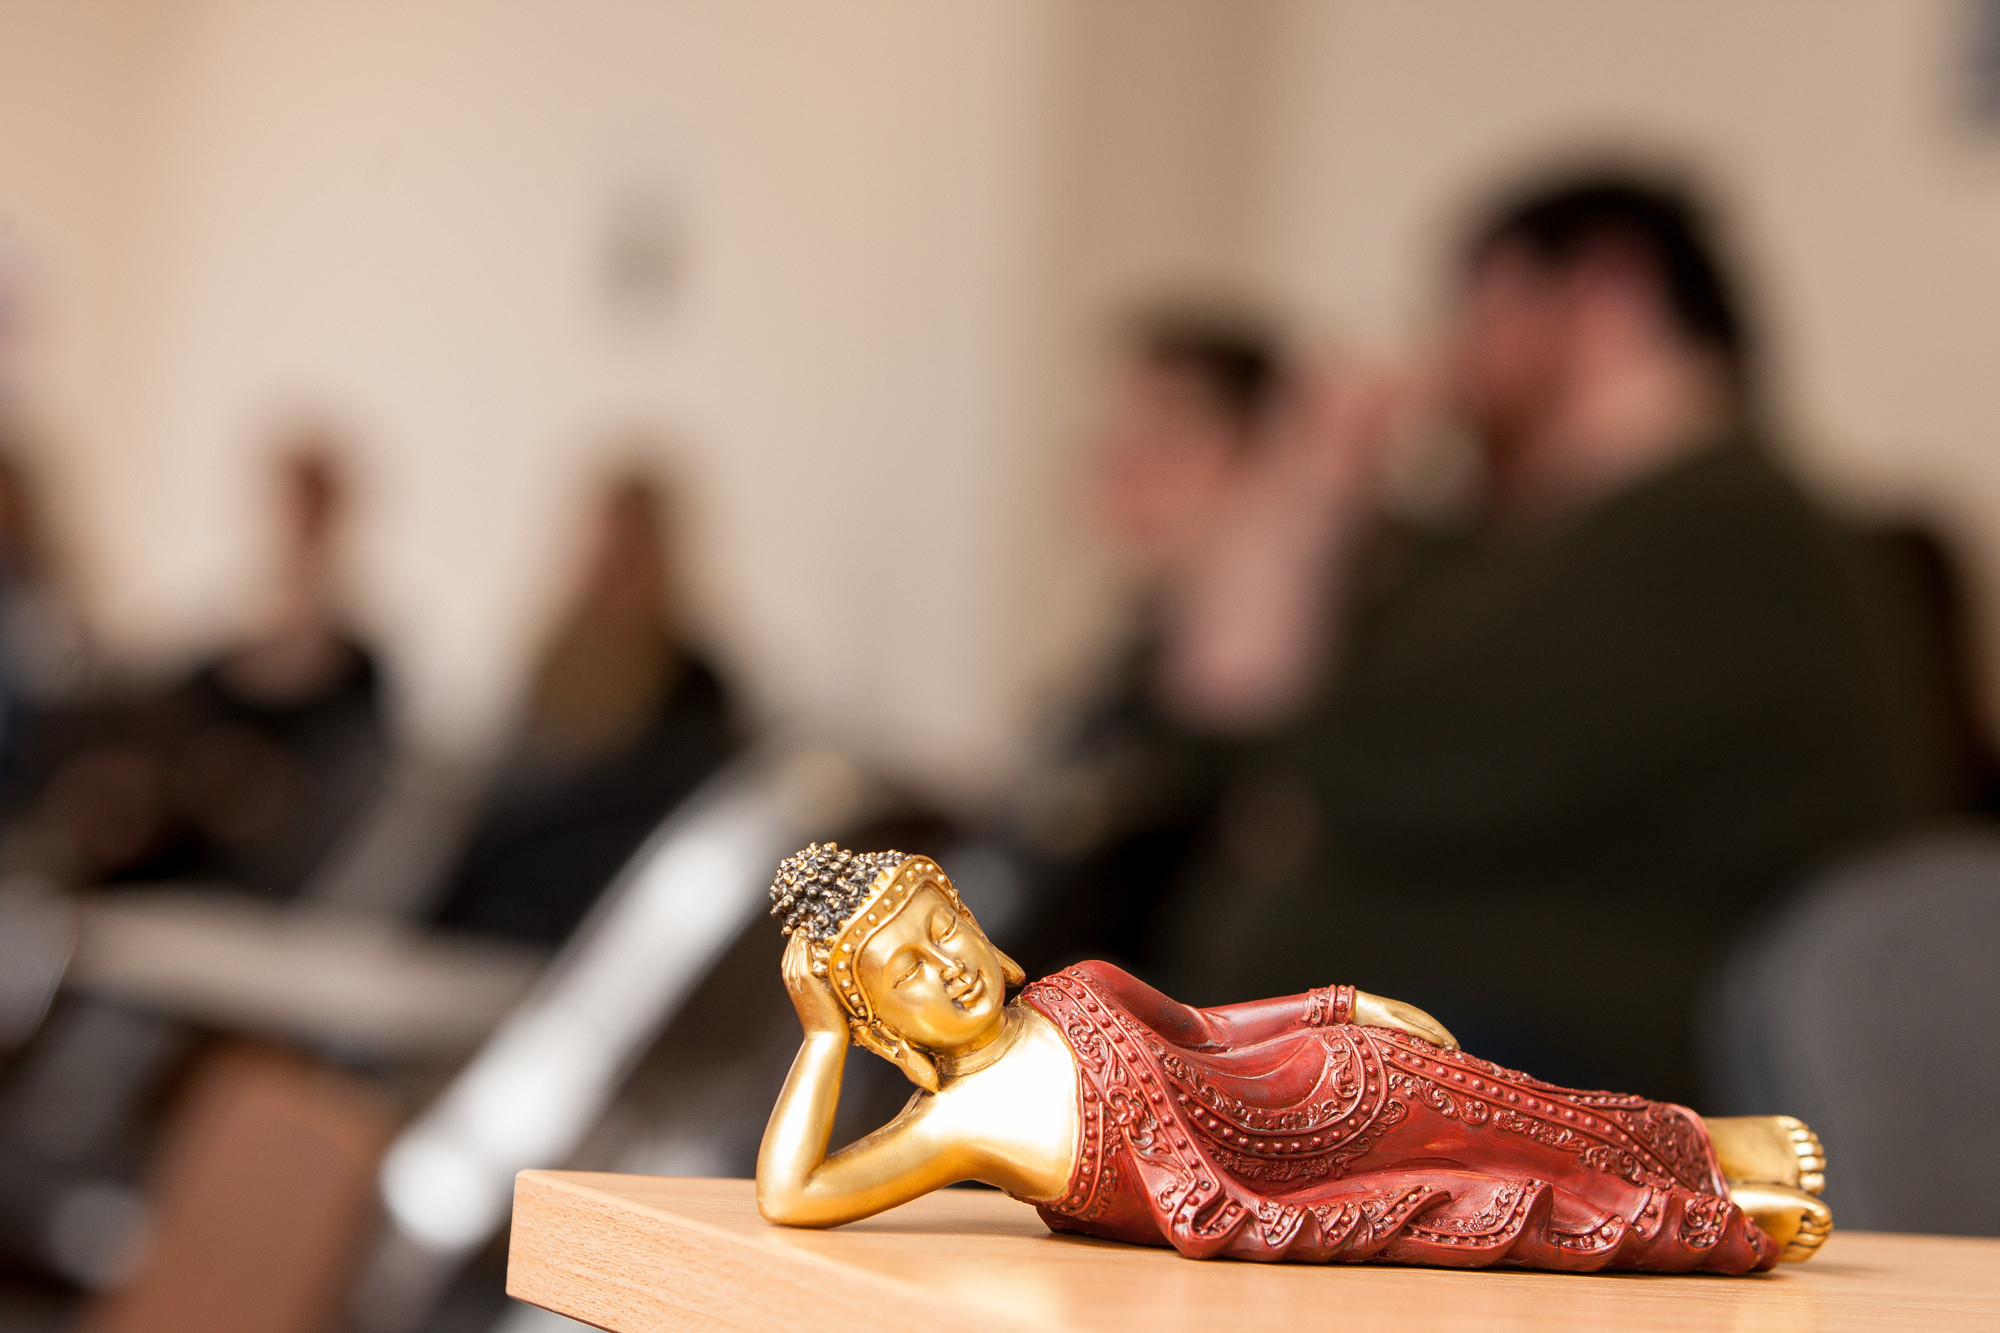 Buddah statue on a desk with students blurred in the background